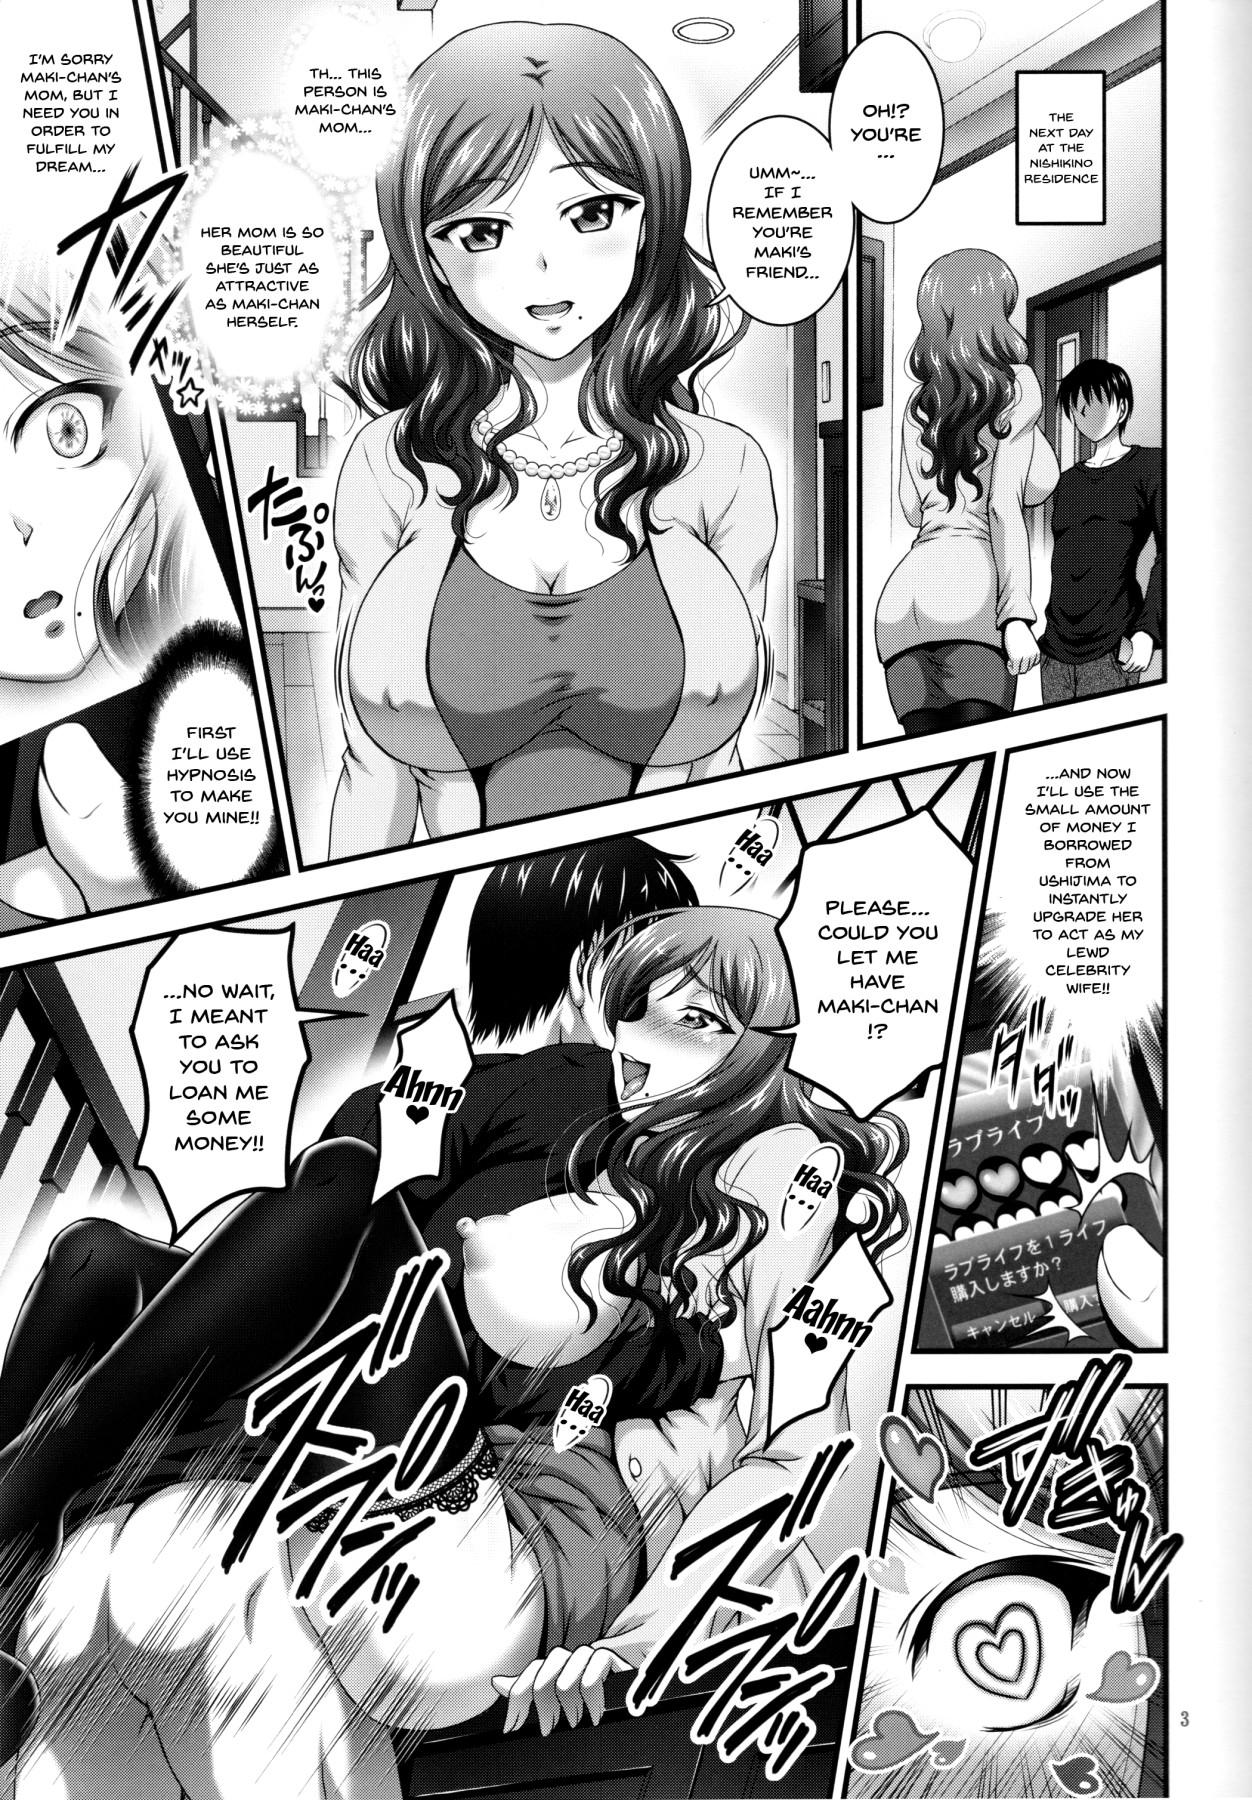 Boquete Ore Yome Saimin 4 | My Wife Hypnosis 4 - Love live Thong - Page 4